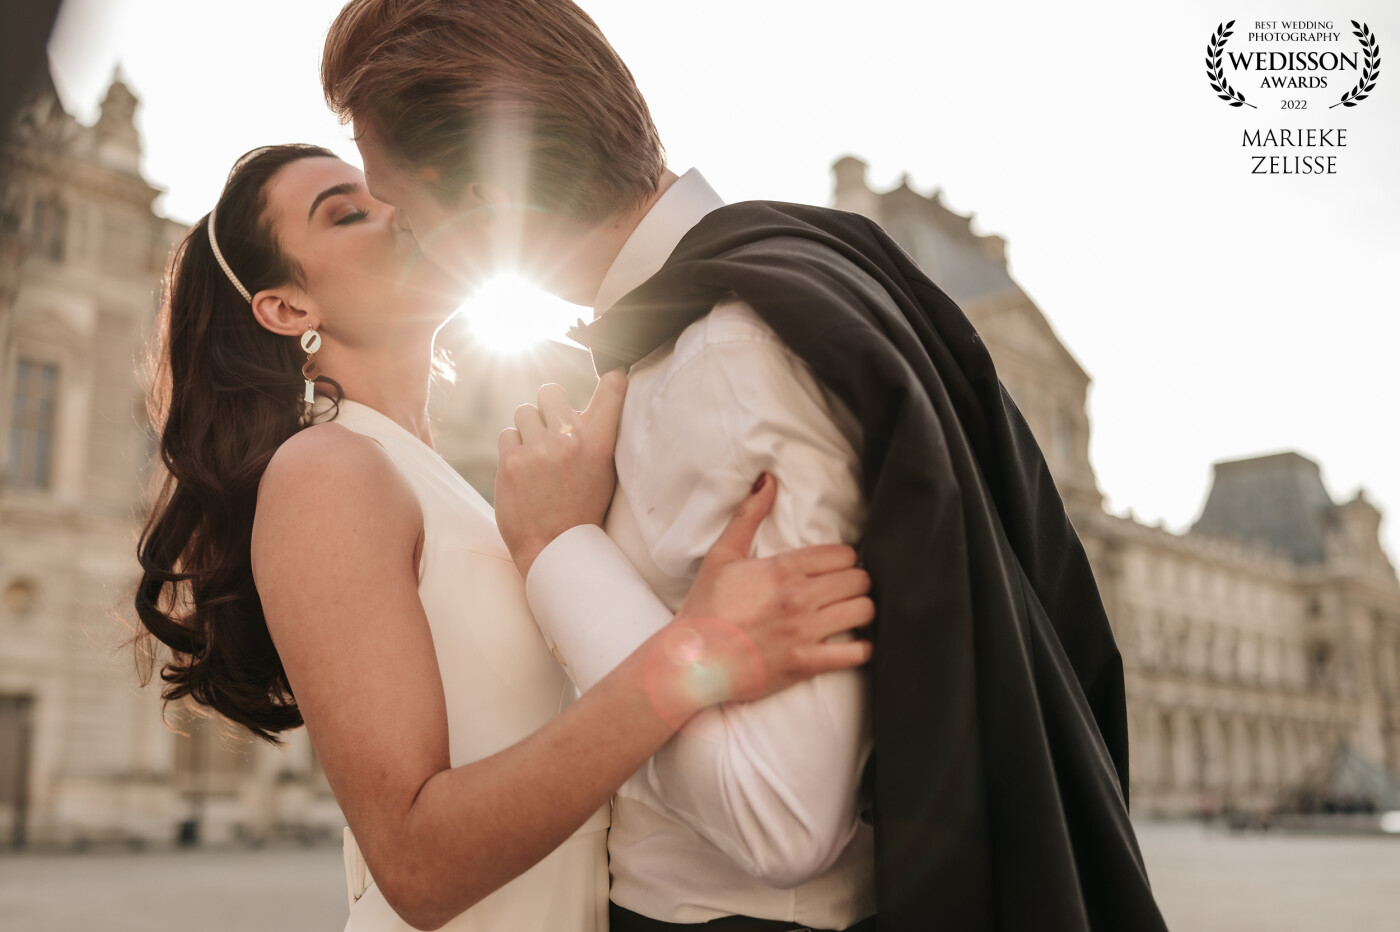 With sundown at the Louvre at beautiful Paris, I took some shot with this stunning couple. I loved there love vibes! A city wedding is always a good idea to get some classy shots.